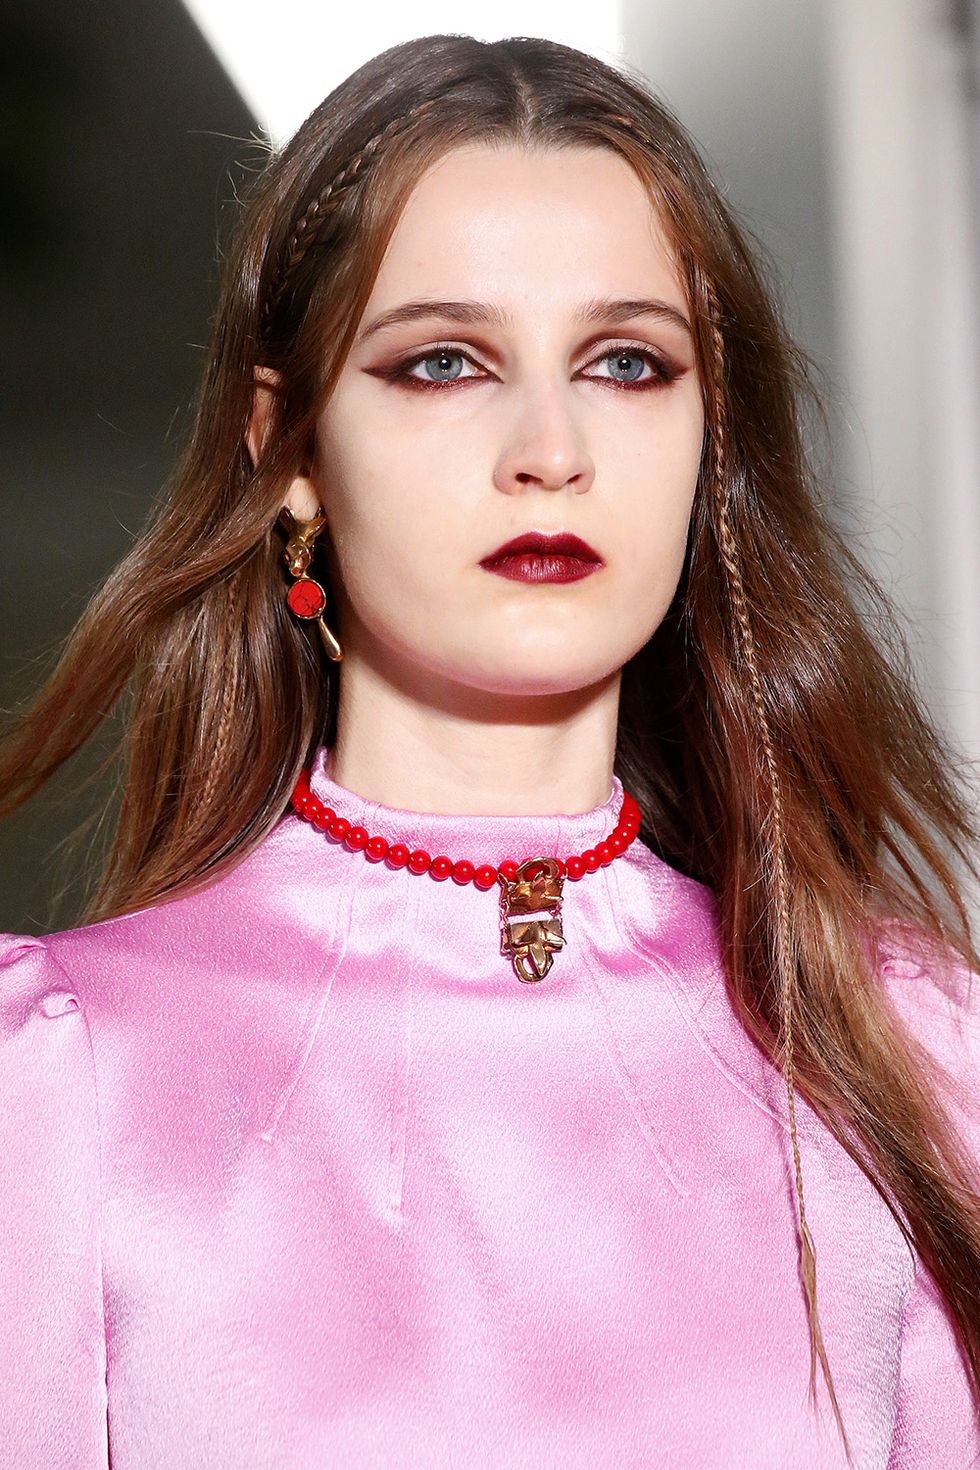 <p>There was a lot more look to be served up this season at Valentino compared to seasons past. Instead of a long, romantic braid—the hair was parted down the middle, and two micro braids were weaved along the hairline.&nbsp;<span class="redactor-invisible-space"></span></p>